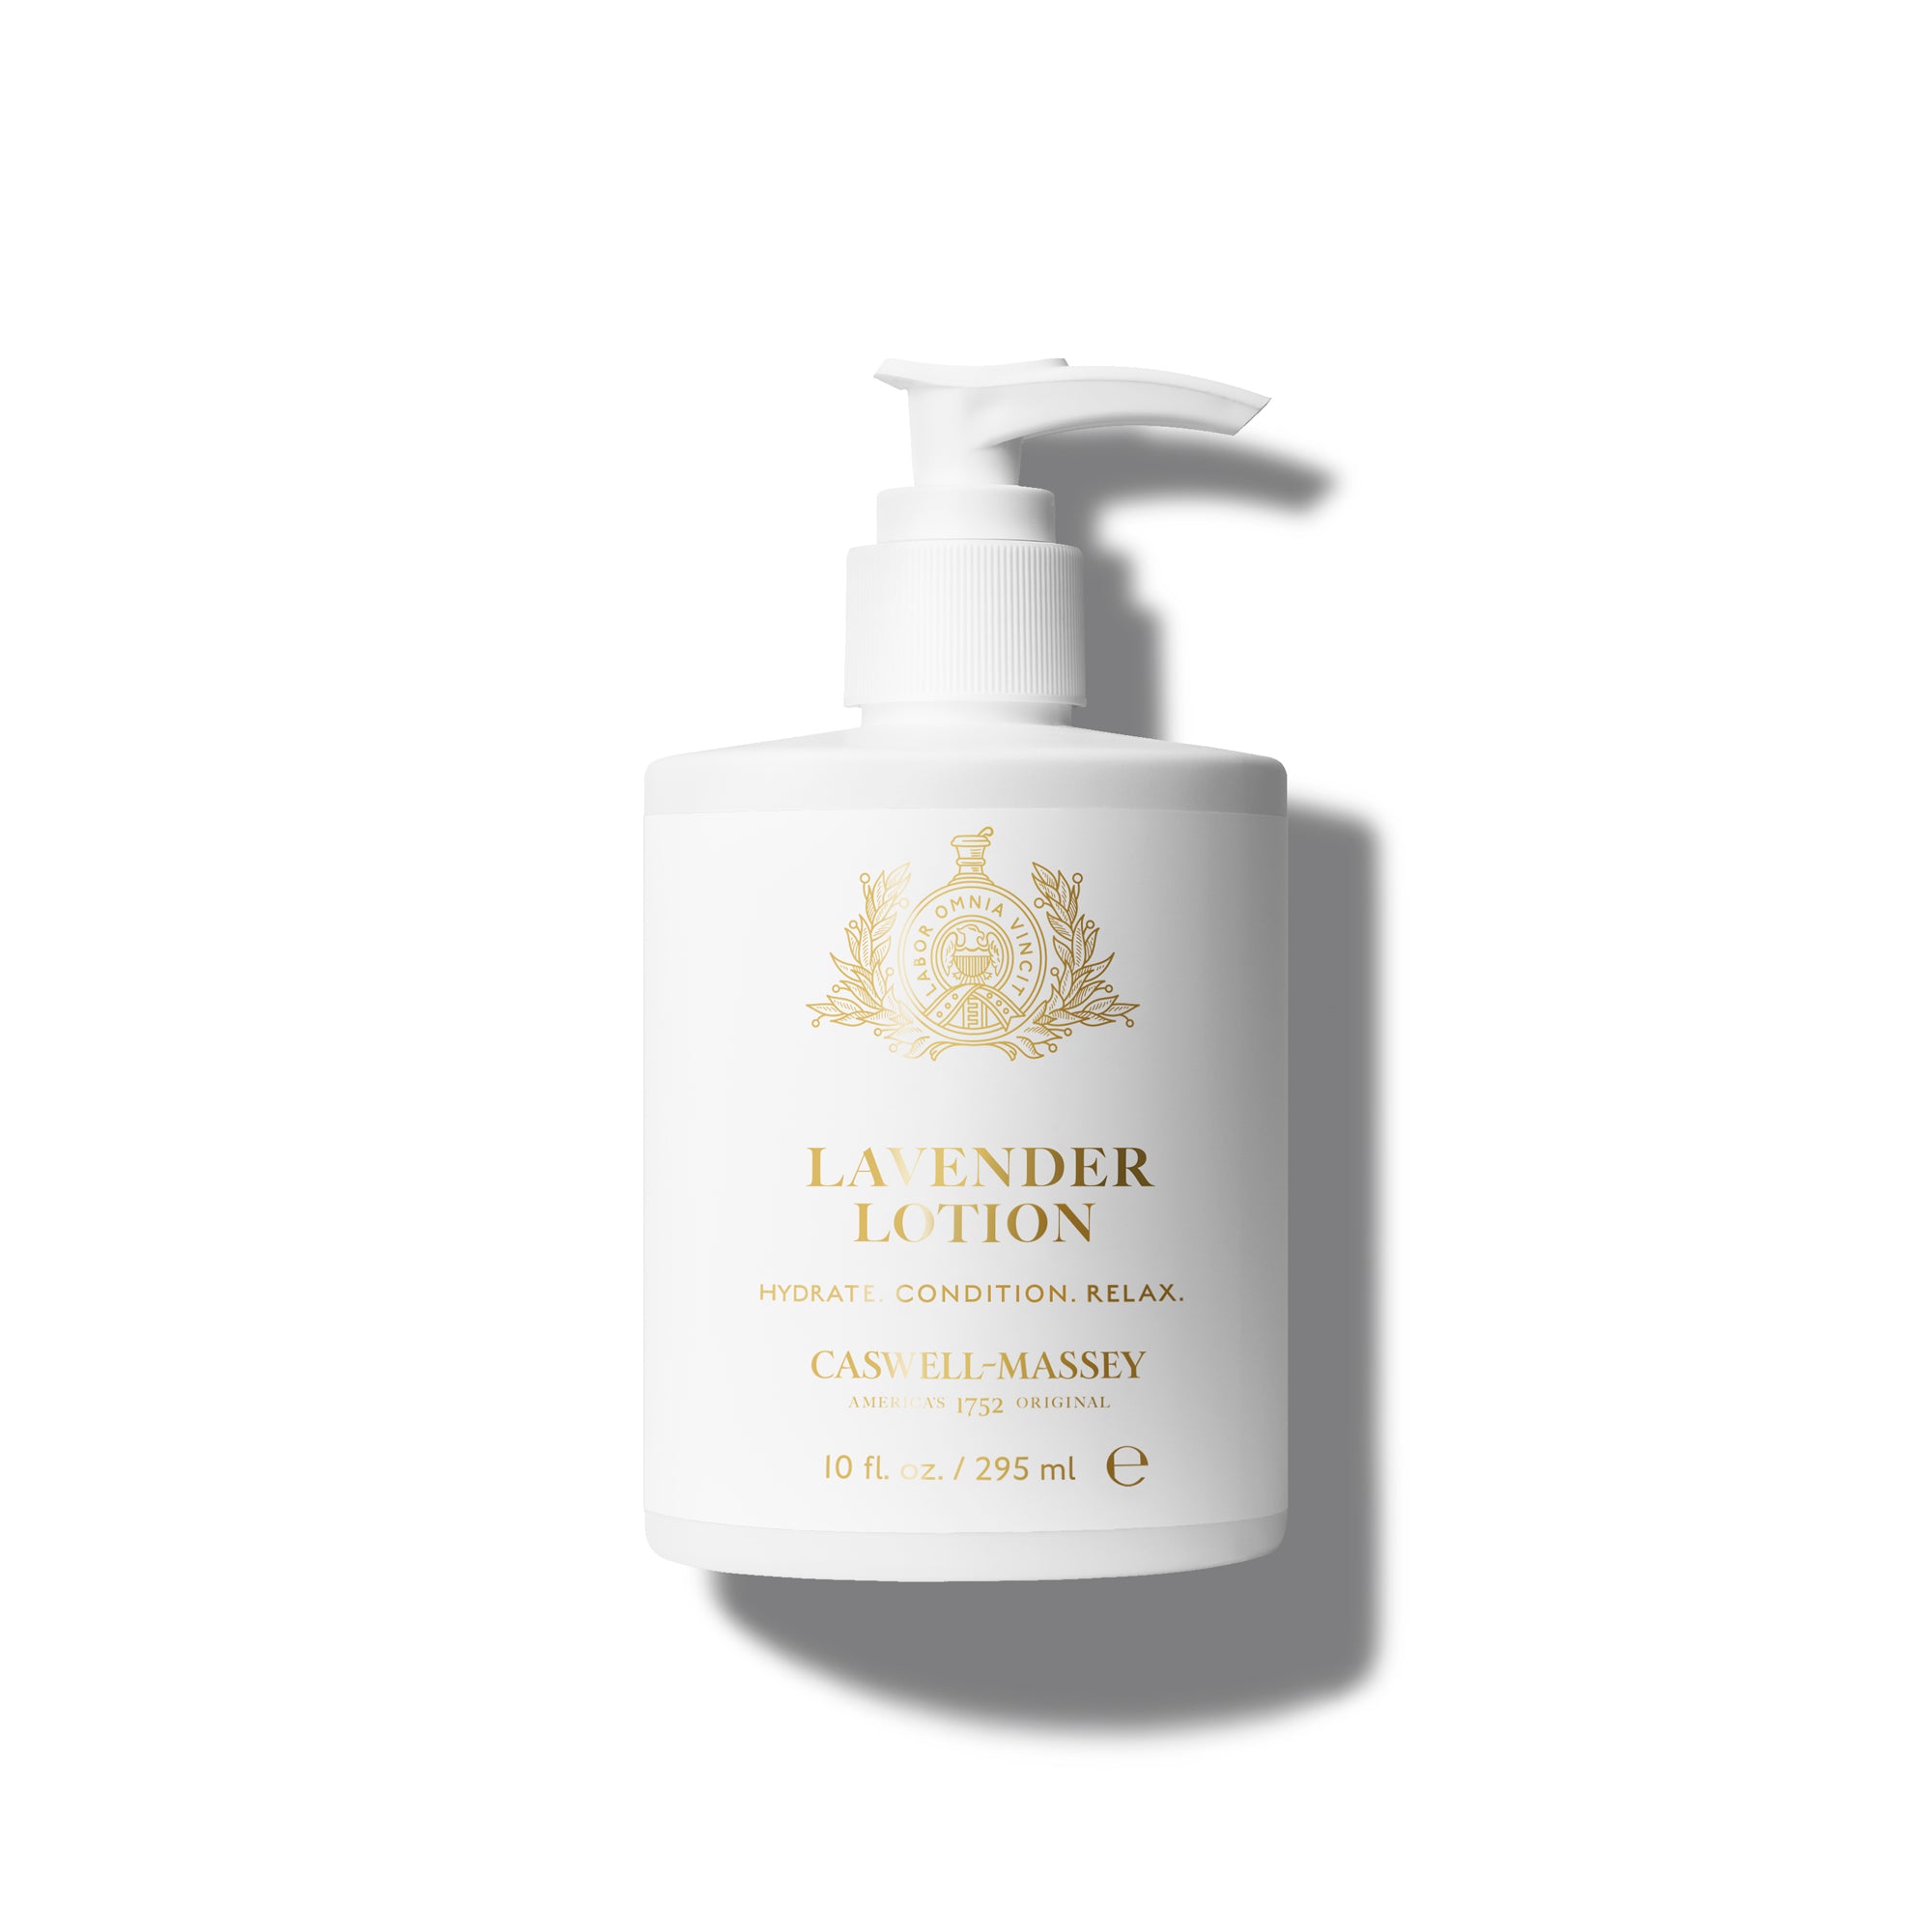 Caswell-Massey Centuries Lavender Lotion for Hands and Body